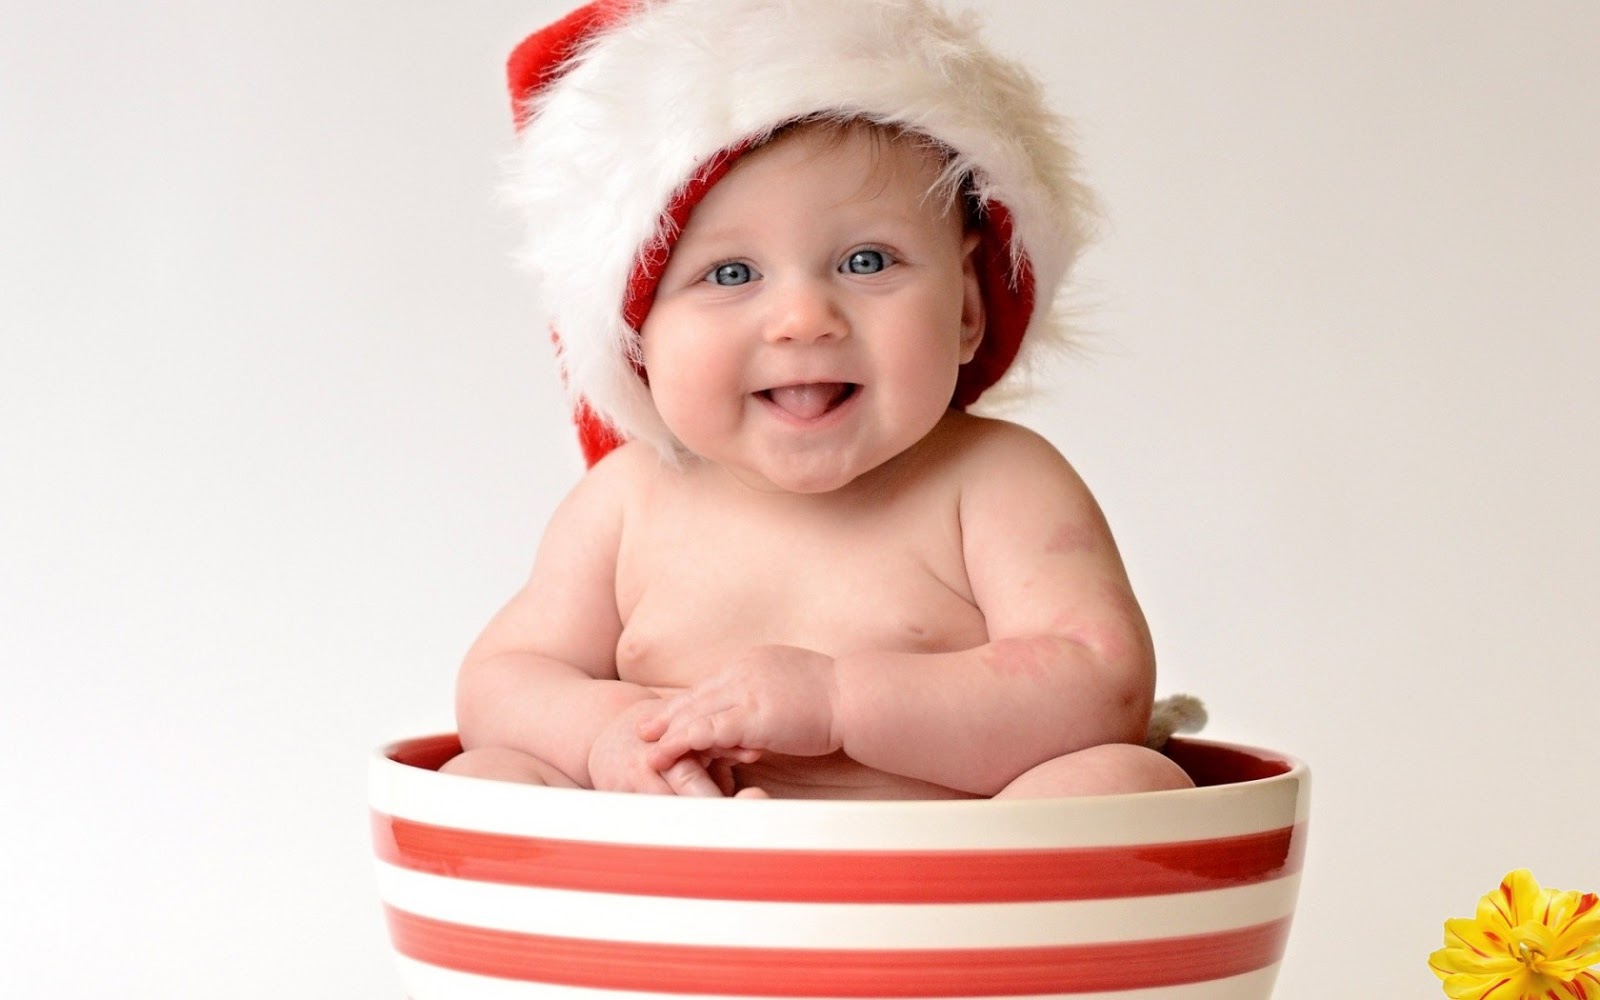 Cute Baby Smile HD Wallpaper Of Smiling Image S